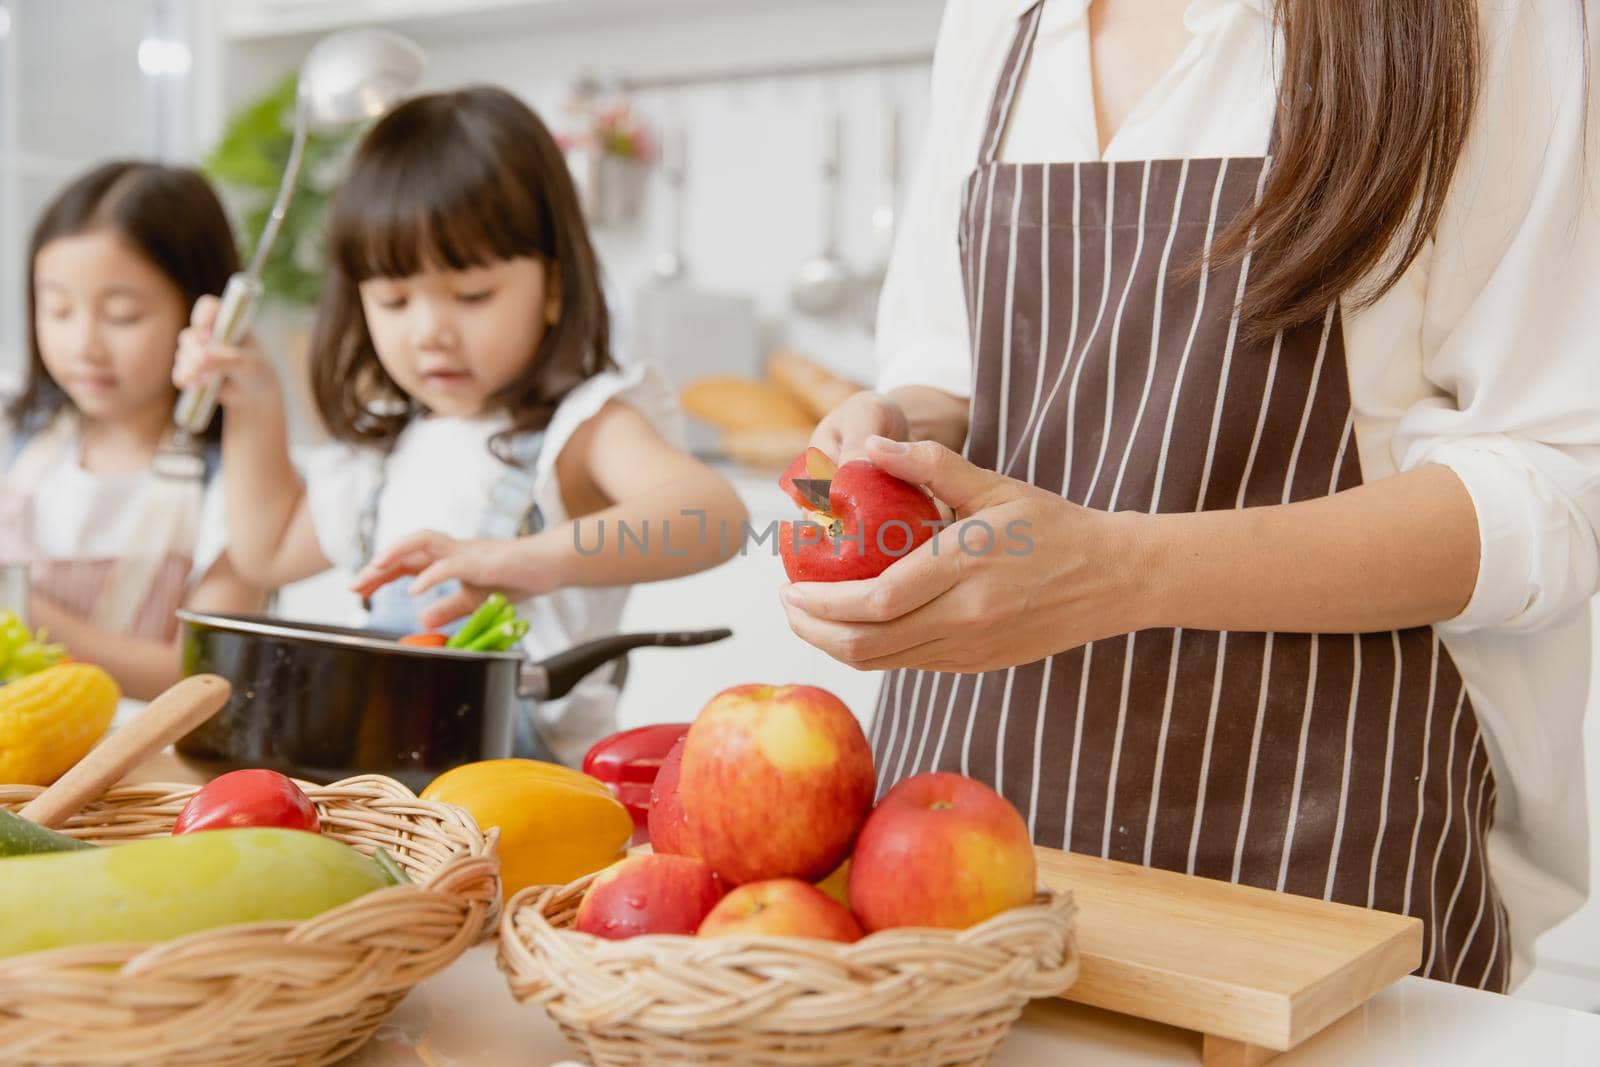 Mother and childs happy to preparing healthy food at home kitchen from vegetables and fruit by qualitystocks